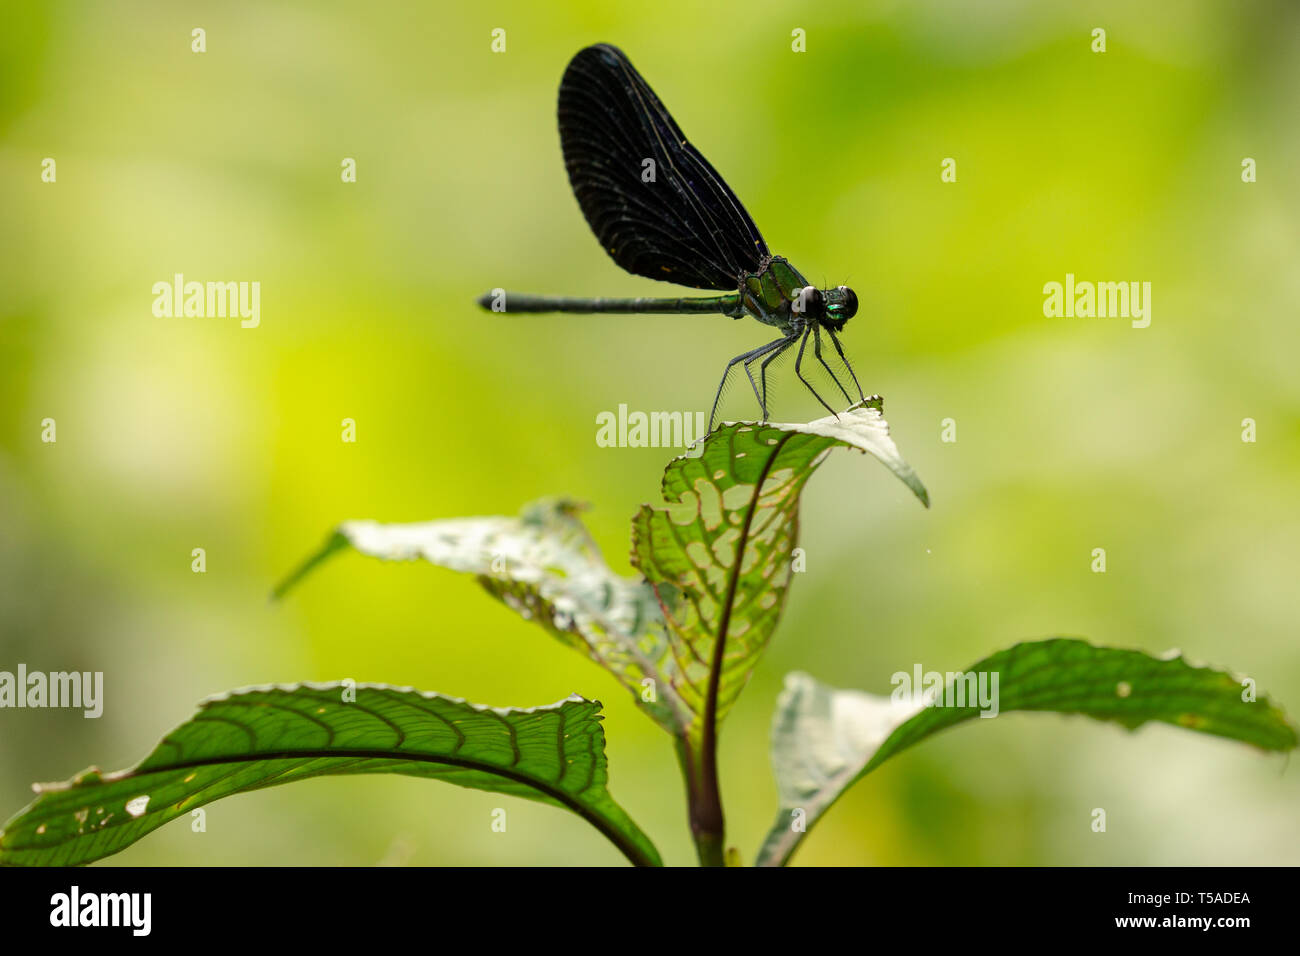 Damselfly perched on a leaf Stock Photo